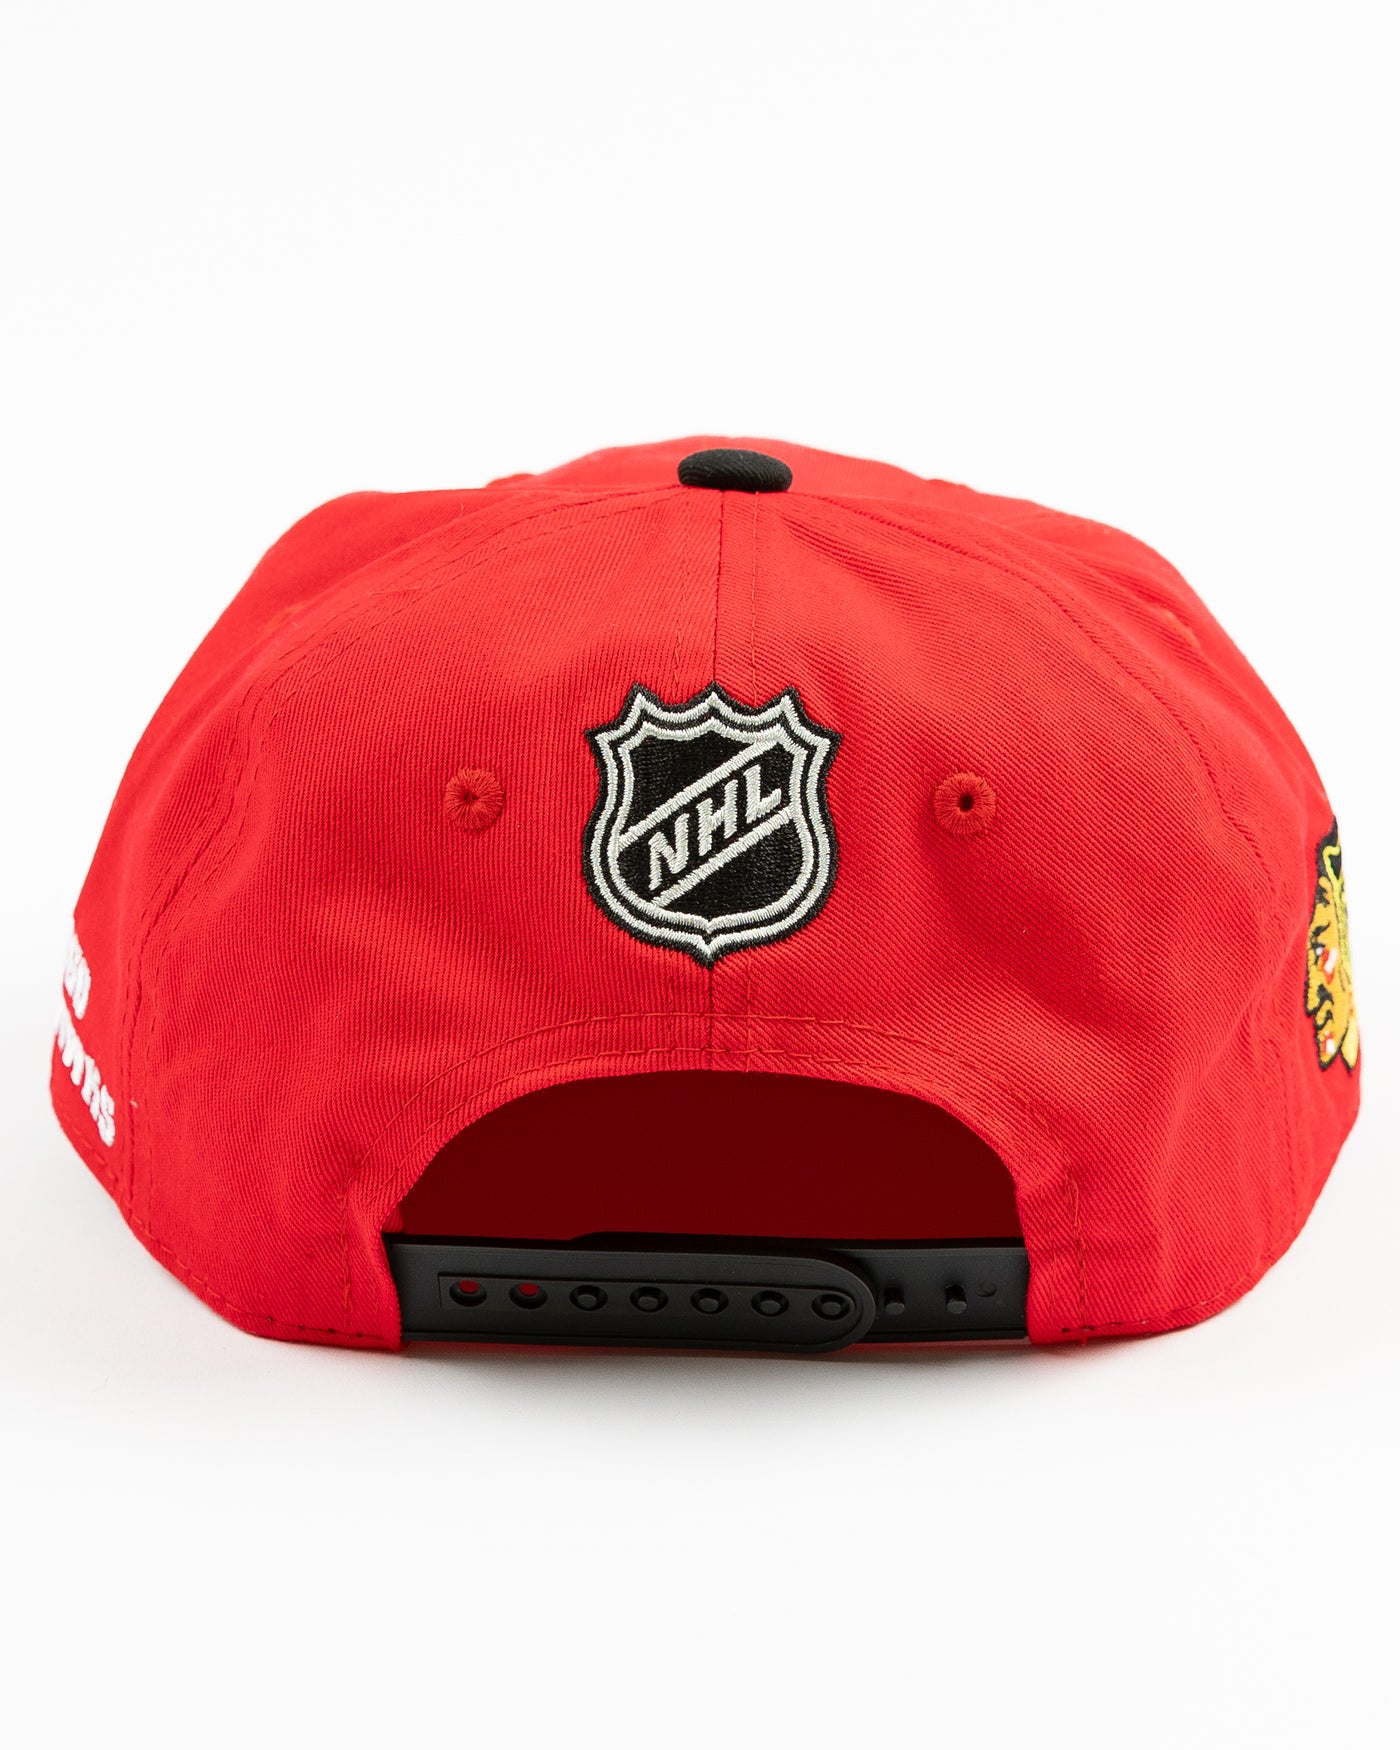 two tone red and black youth snapback cap with Chicago Blackhawks wordmark and primary logo across front - back lay flat